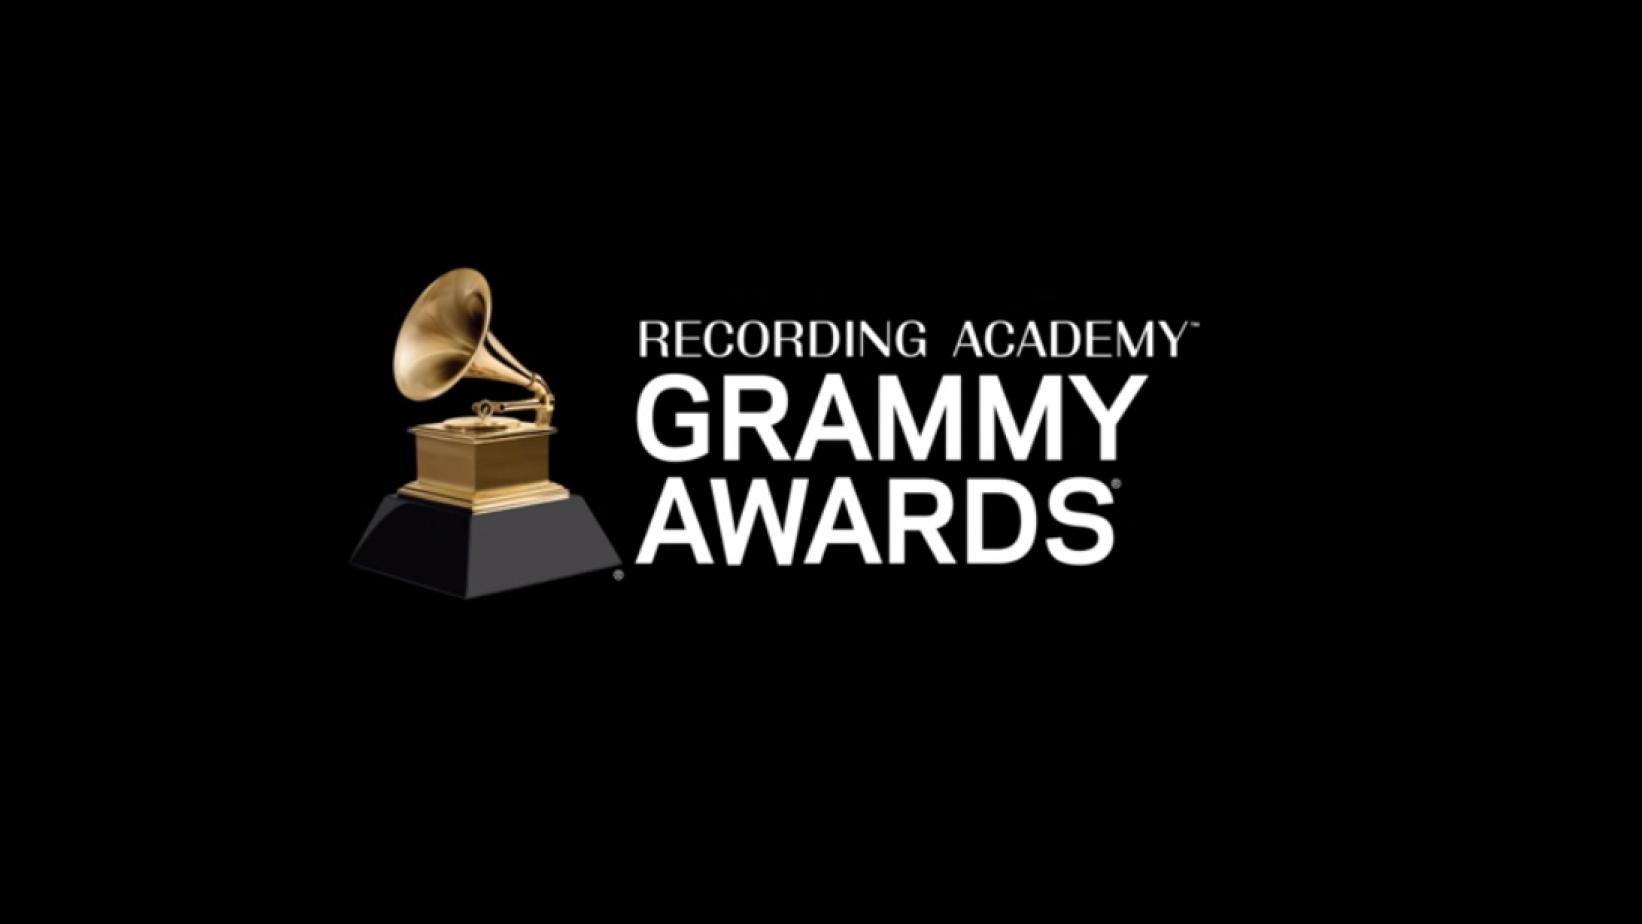 Congratulations to Concerted Efforts' Grammy Award Winning Artists